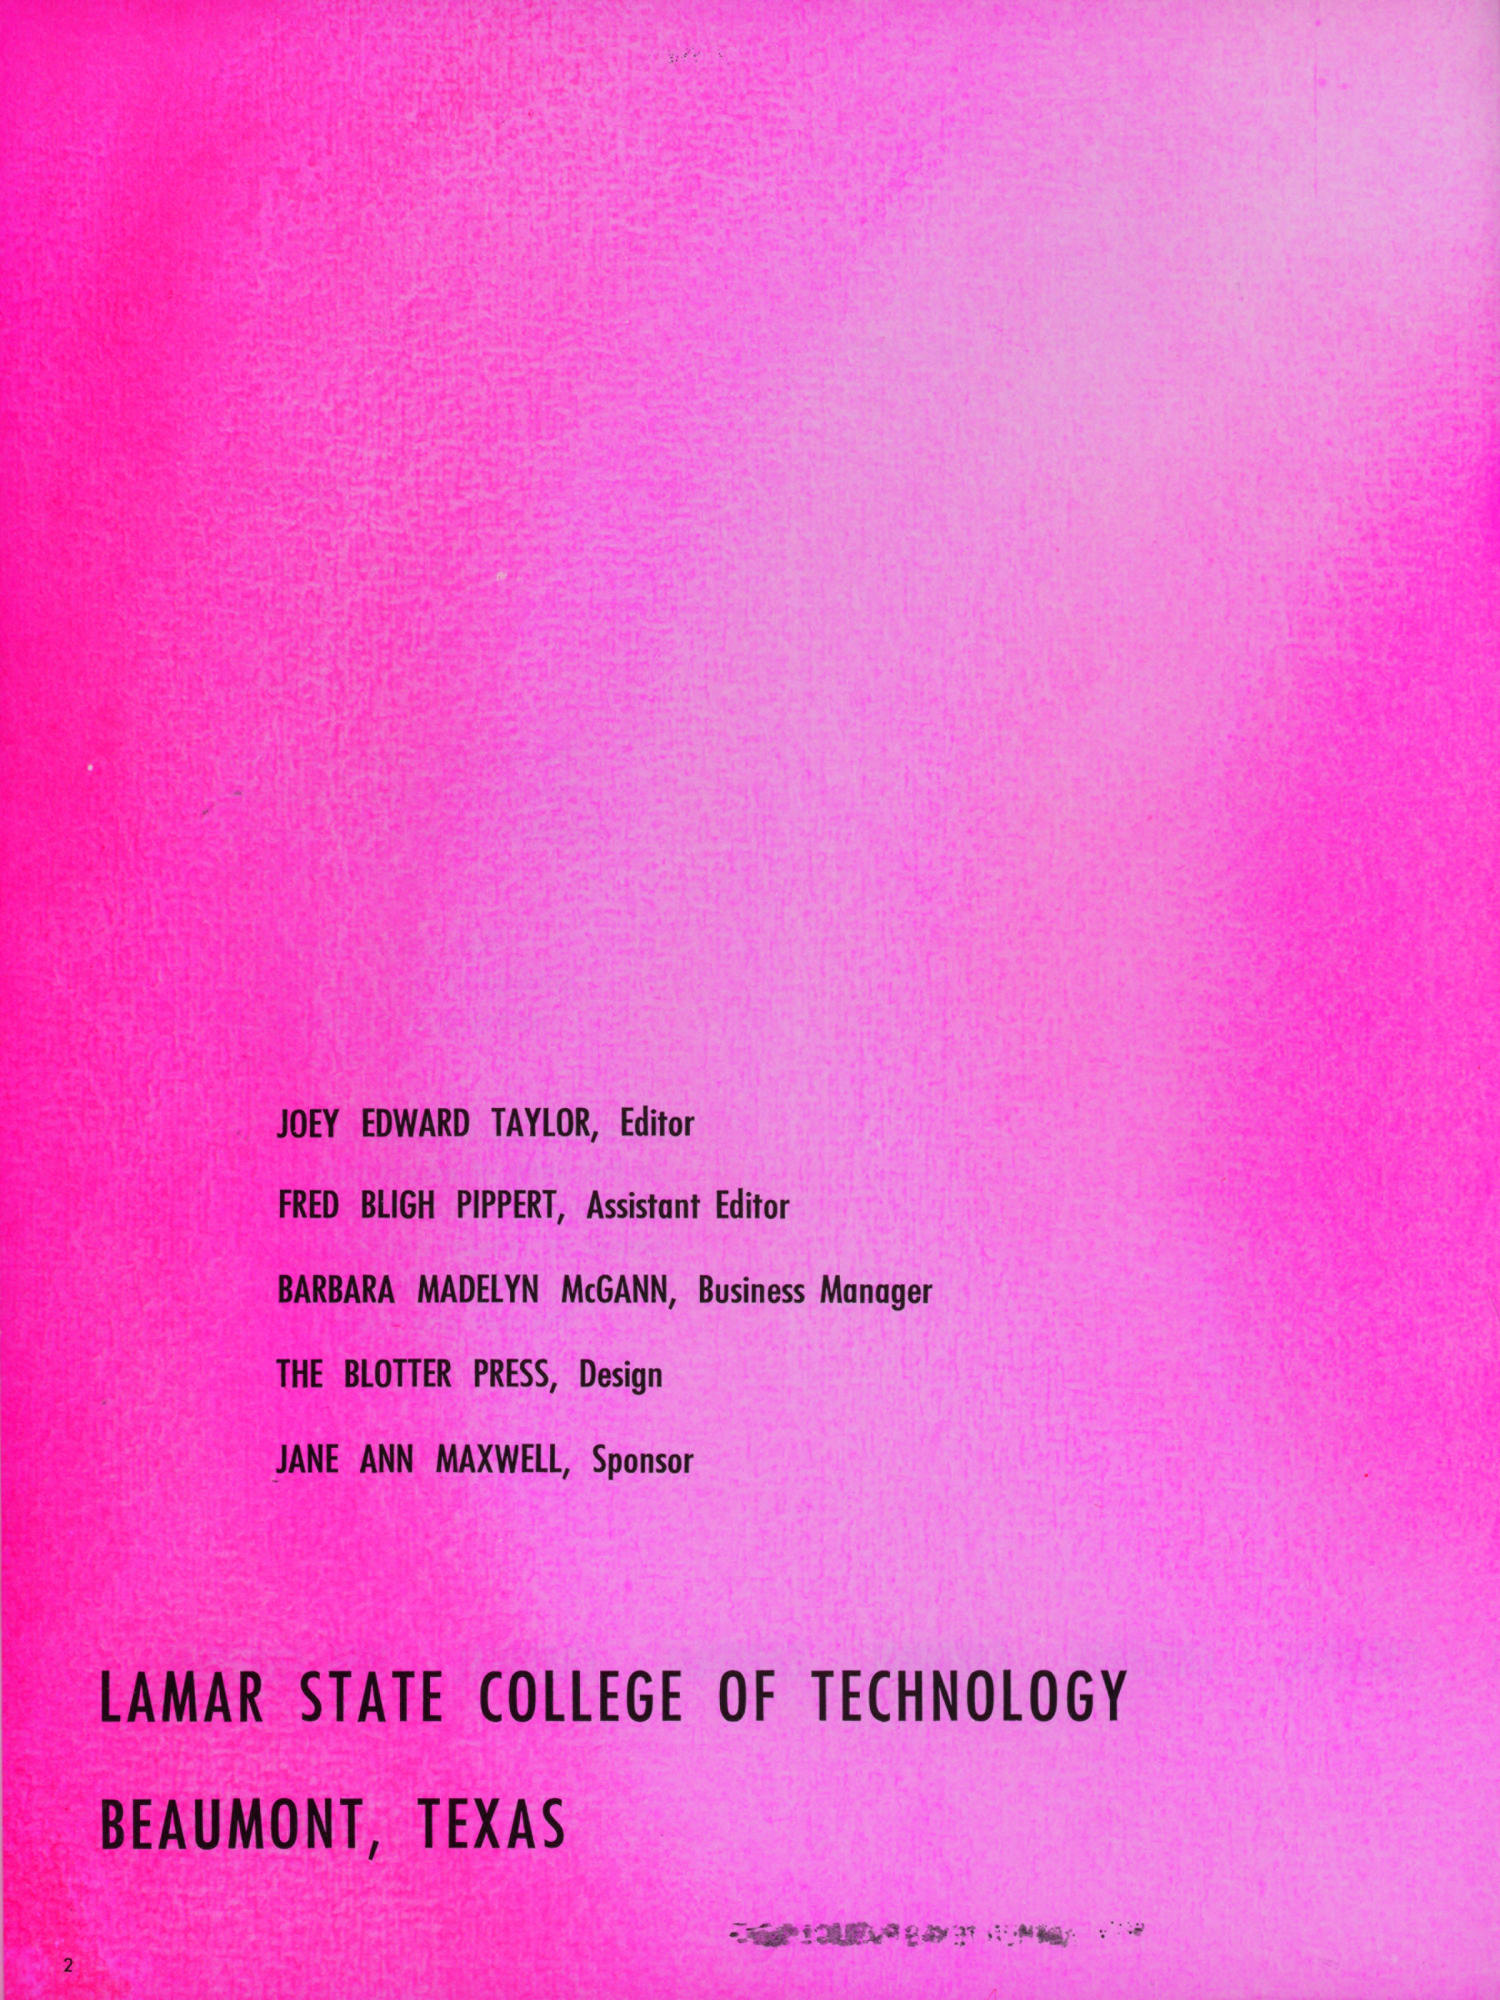 The Cardinal, Yearbook of Lamar State College of Technology, 1966
                                                
                                                    2
                                                